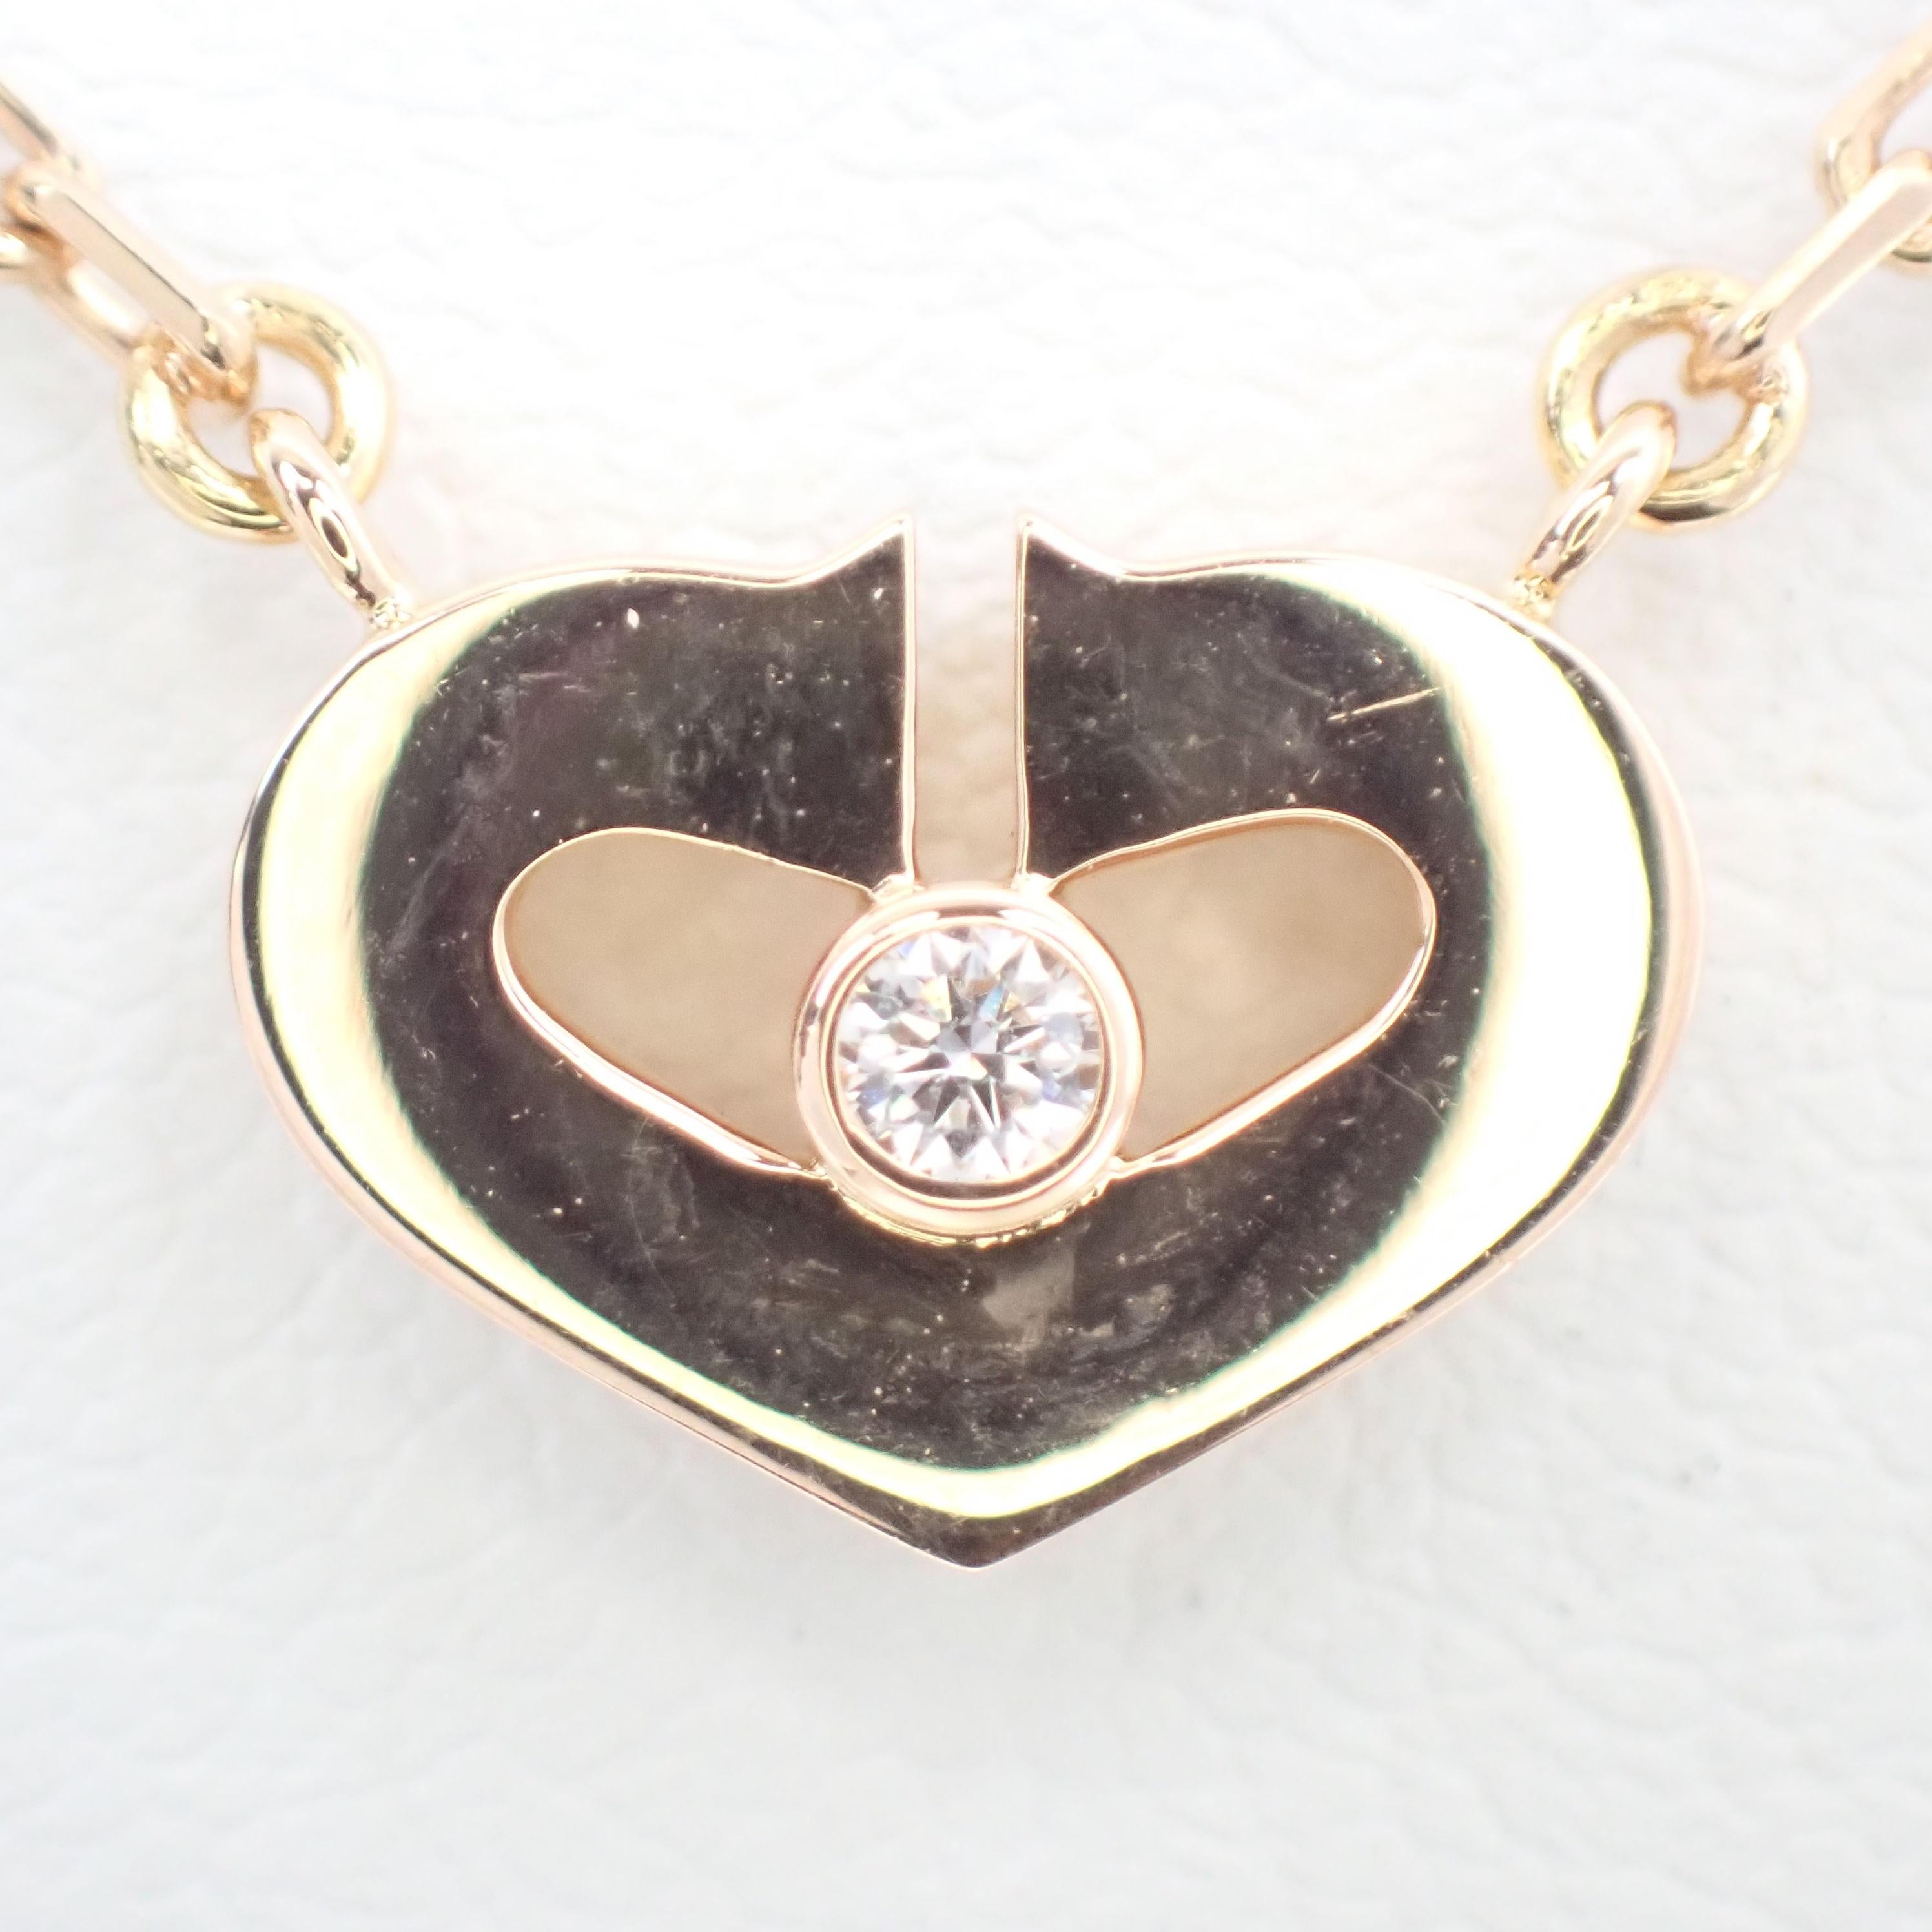 Brand : Cartier 
Description: C Heart of Cartier Diamond 18K Rose Gold Pendant Necklace 1PD
Metal Type:  750PG/ Rose Gold 
Total Weight:   4.3g
Width:  10mm
Condition: Preowned; small signs of wearing
Box -  Included
Papers -  Not Included
